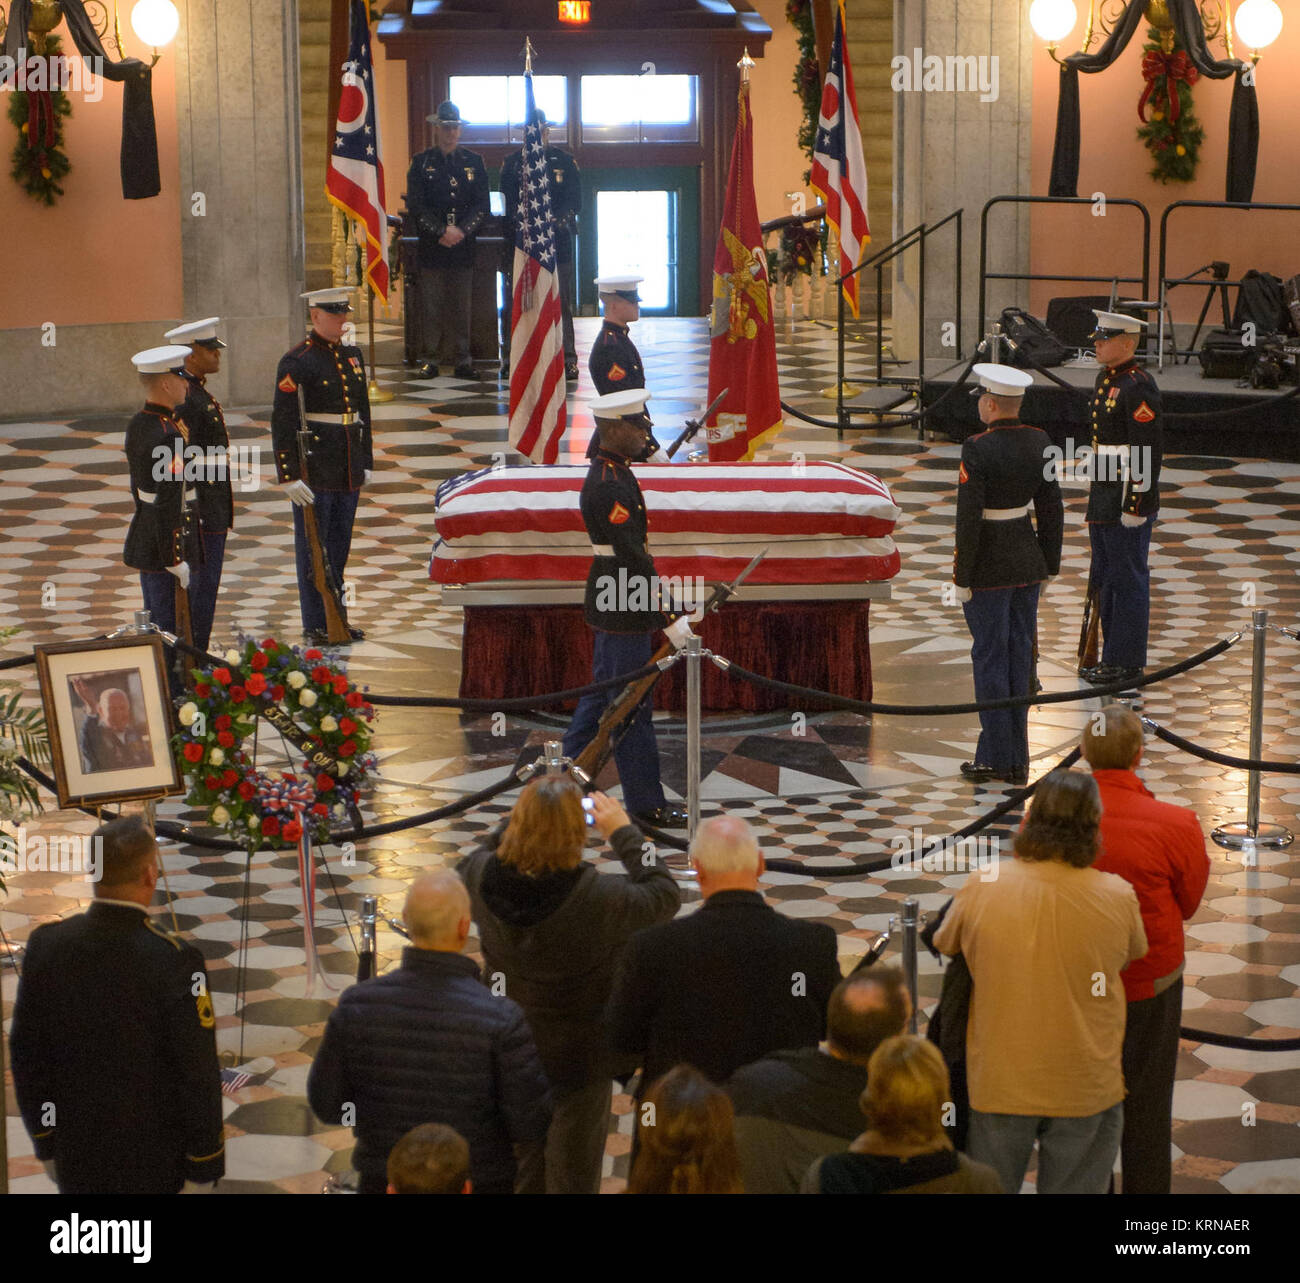 The United States Marine honor guard performs a Changing of the Guard as former astronaut and U.S. Senator John Glenn lies in repose, in the Rotunda of the Ohio Statehouse in Columbus, Friday, Dec. 16, 2016. Photo Credit: (NASA/Bill Ingalls) John Glenn in Repose at the Ohio Statehouse (NHQ201612160007) Stock Photo